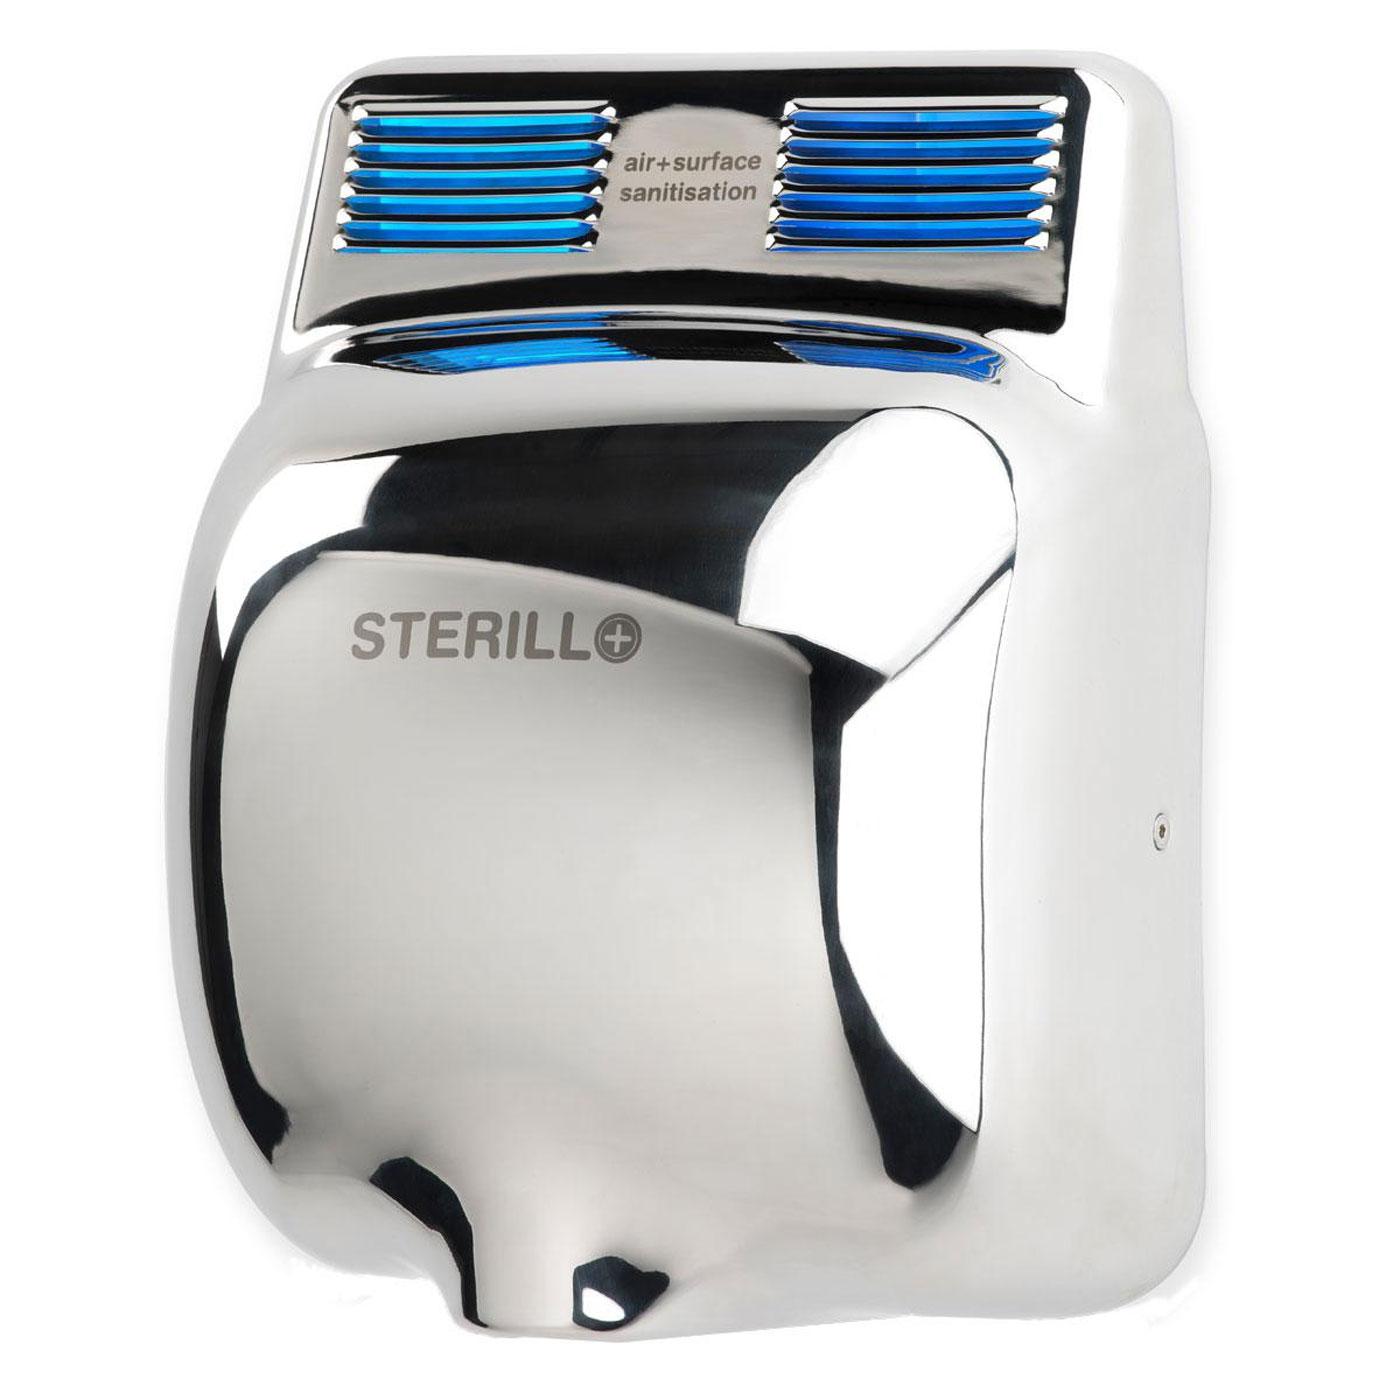 AirSteril Sterillo Polished Stainless Steel - 2208S